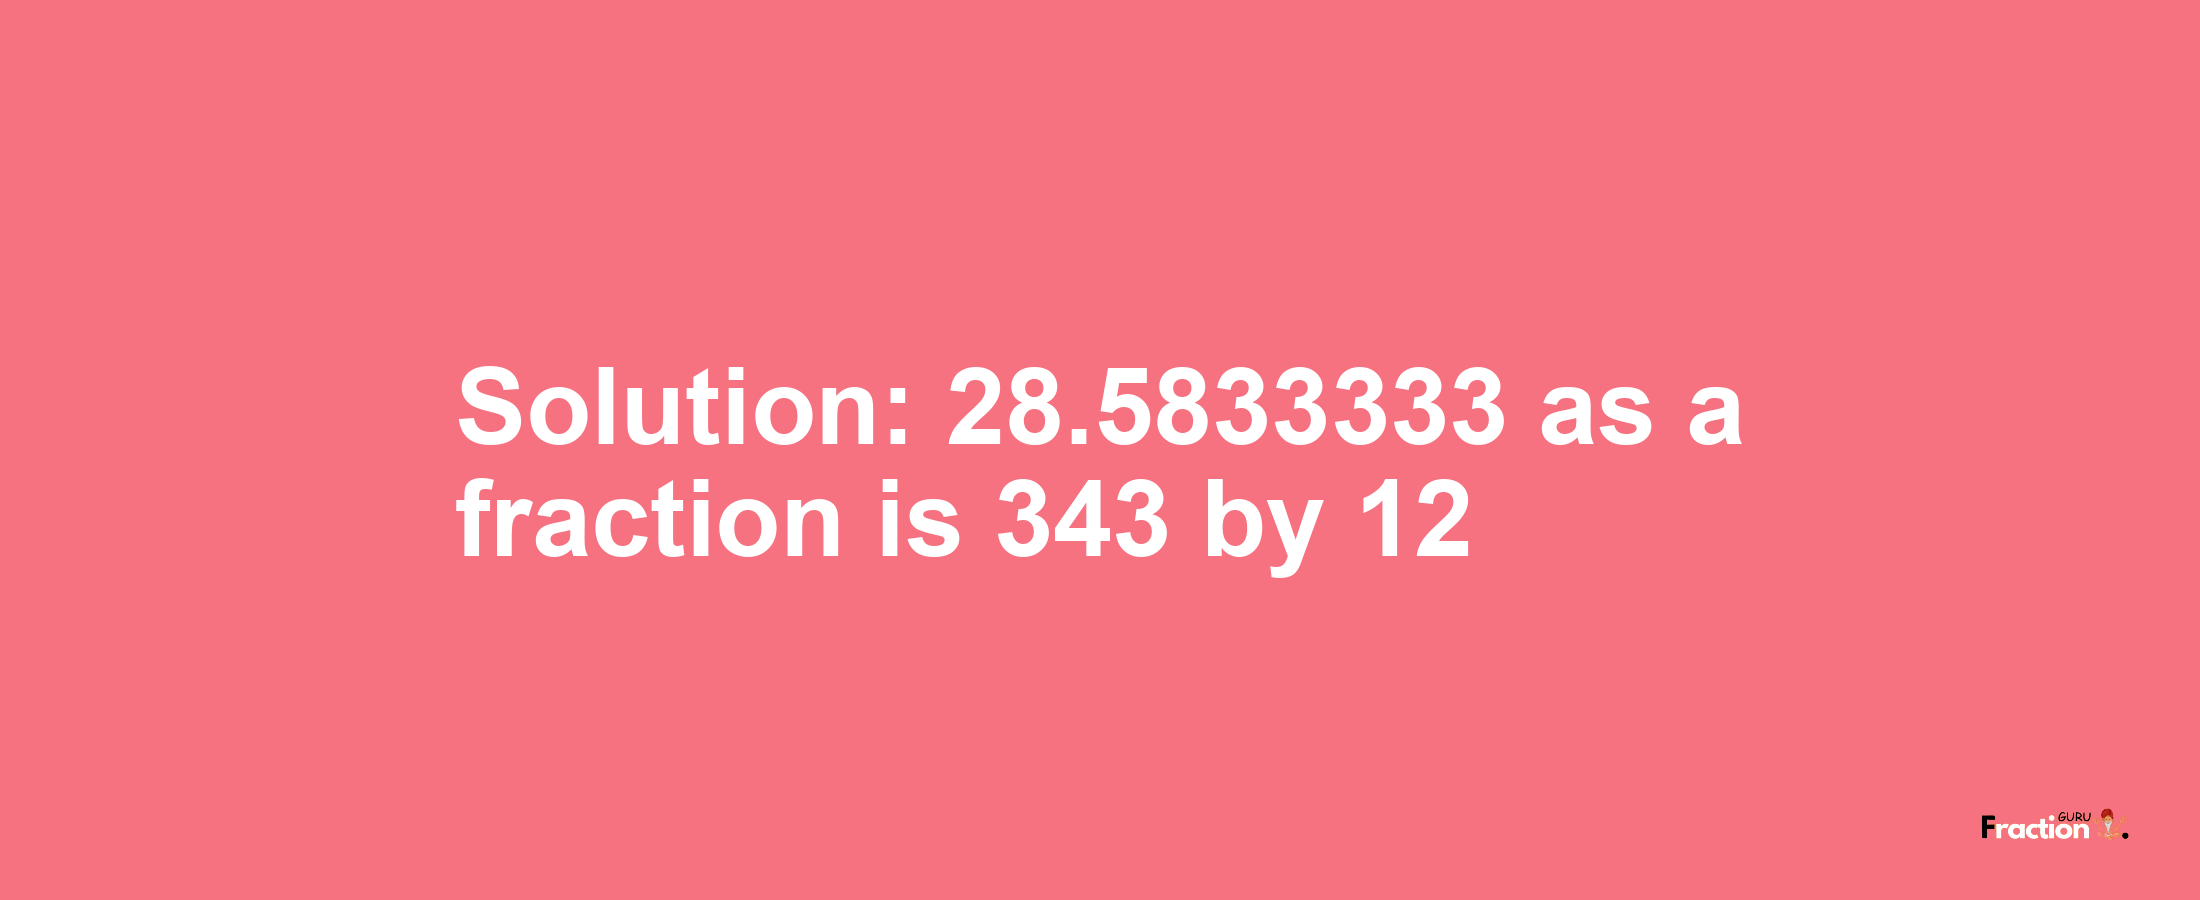 Solution:28.5833333 as a fraction is 343/12